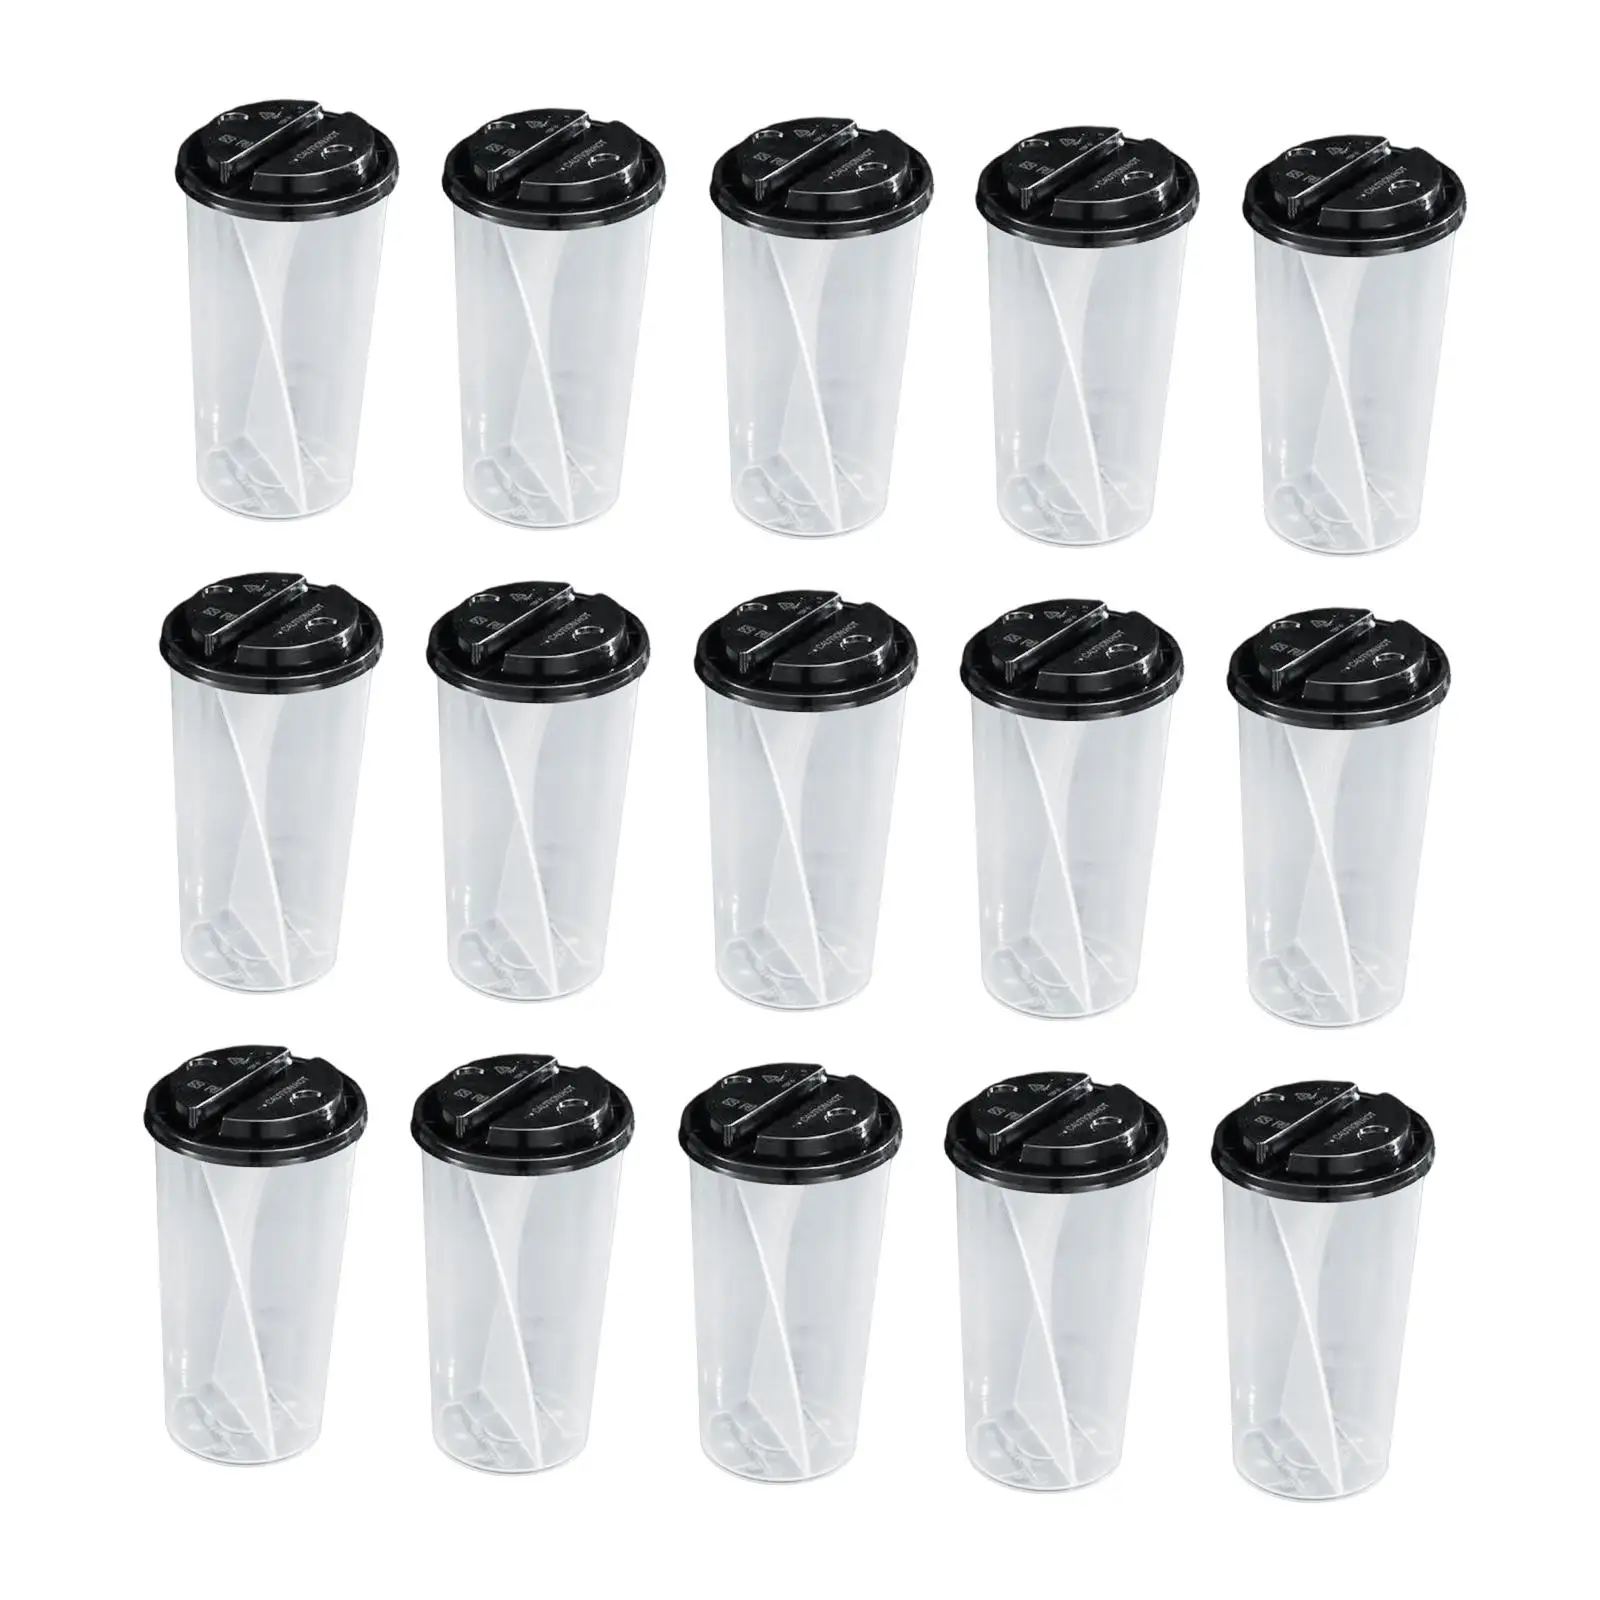 15Pcs Disposable Cups 750ml Bubble Boba 2 Slot Water Cup Iced Coffee Cups Juice Cup for Tea Drink Beverage Milkshake Juicing